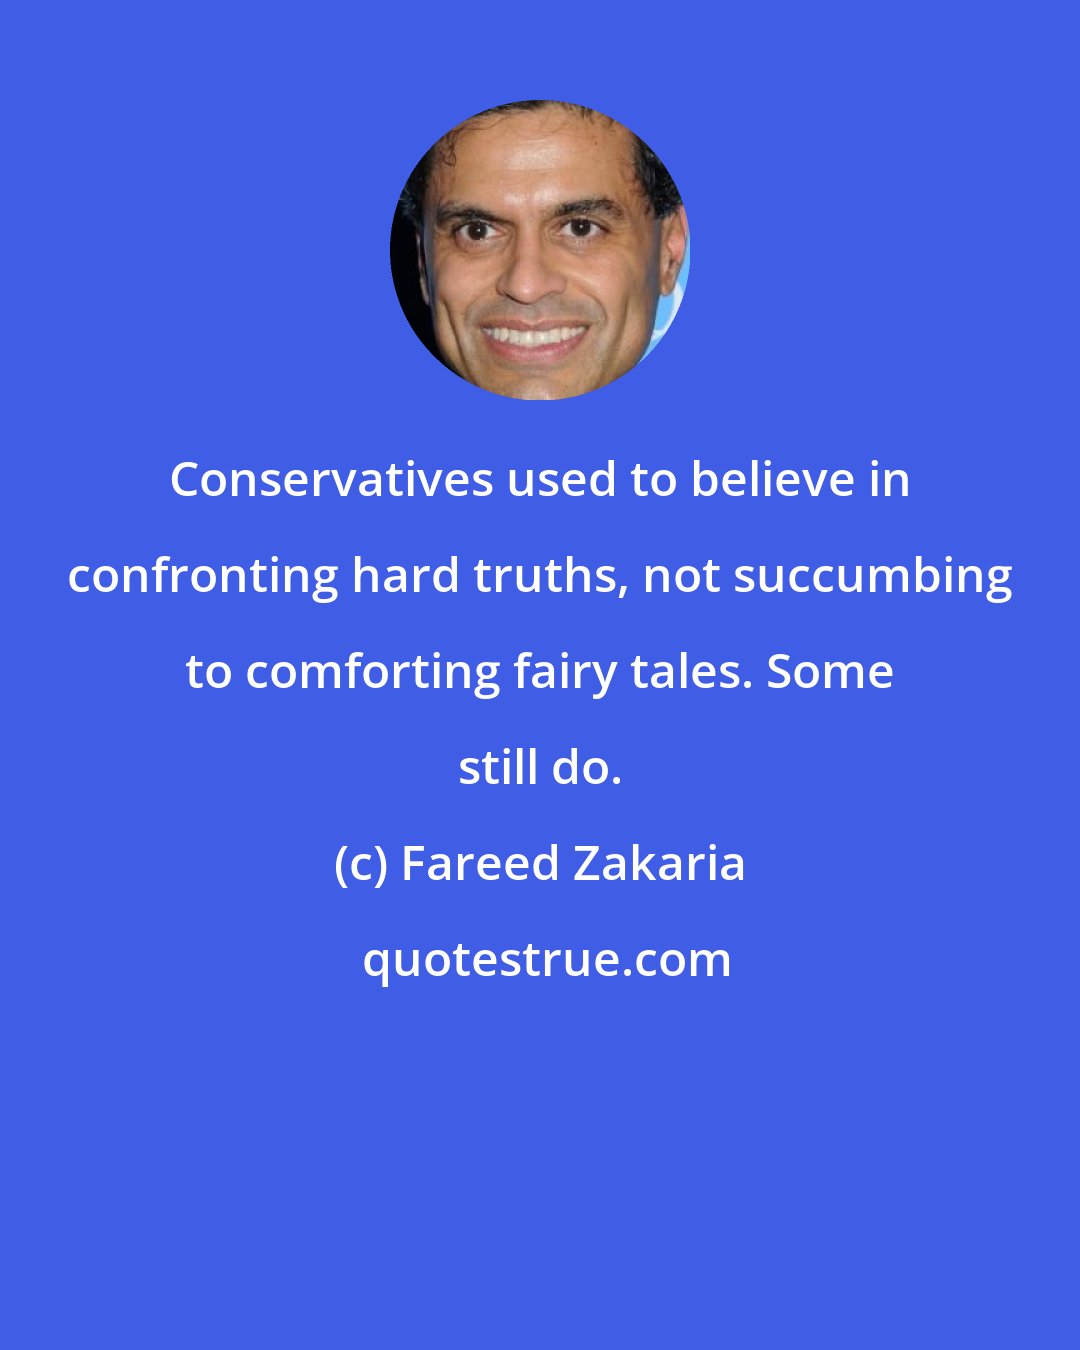 Fareed Zakaria: Conservatives used to believe in confronting hard truths, not succumbing to comforting fairy tales. Some still do.